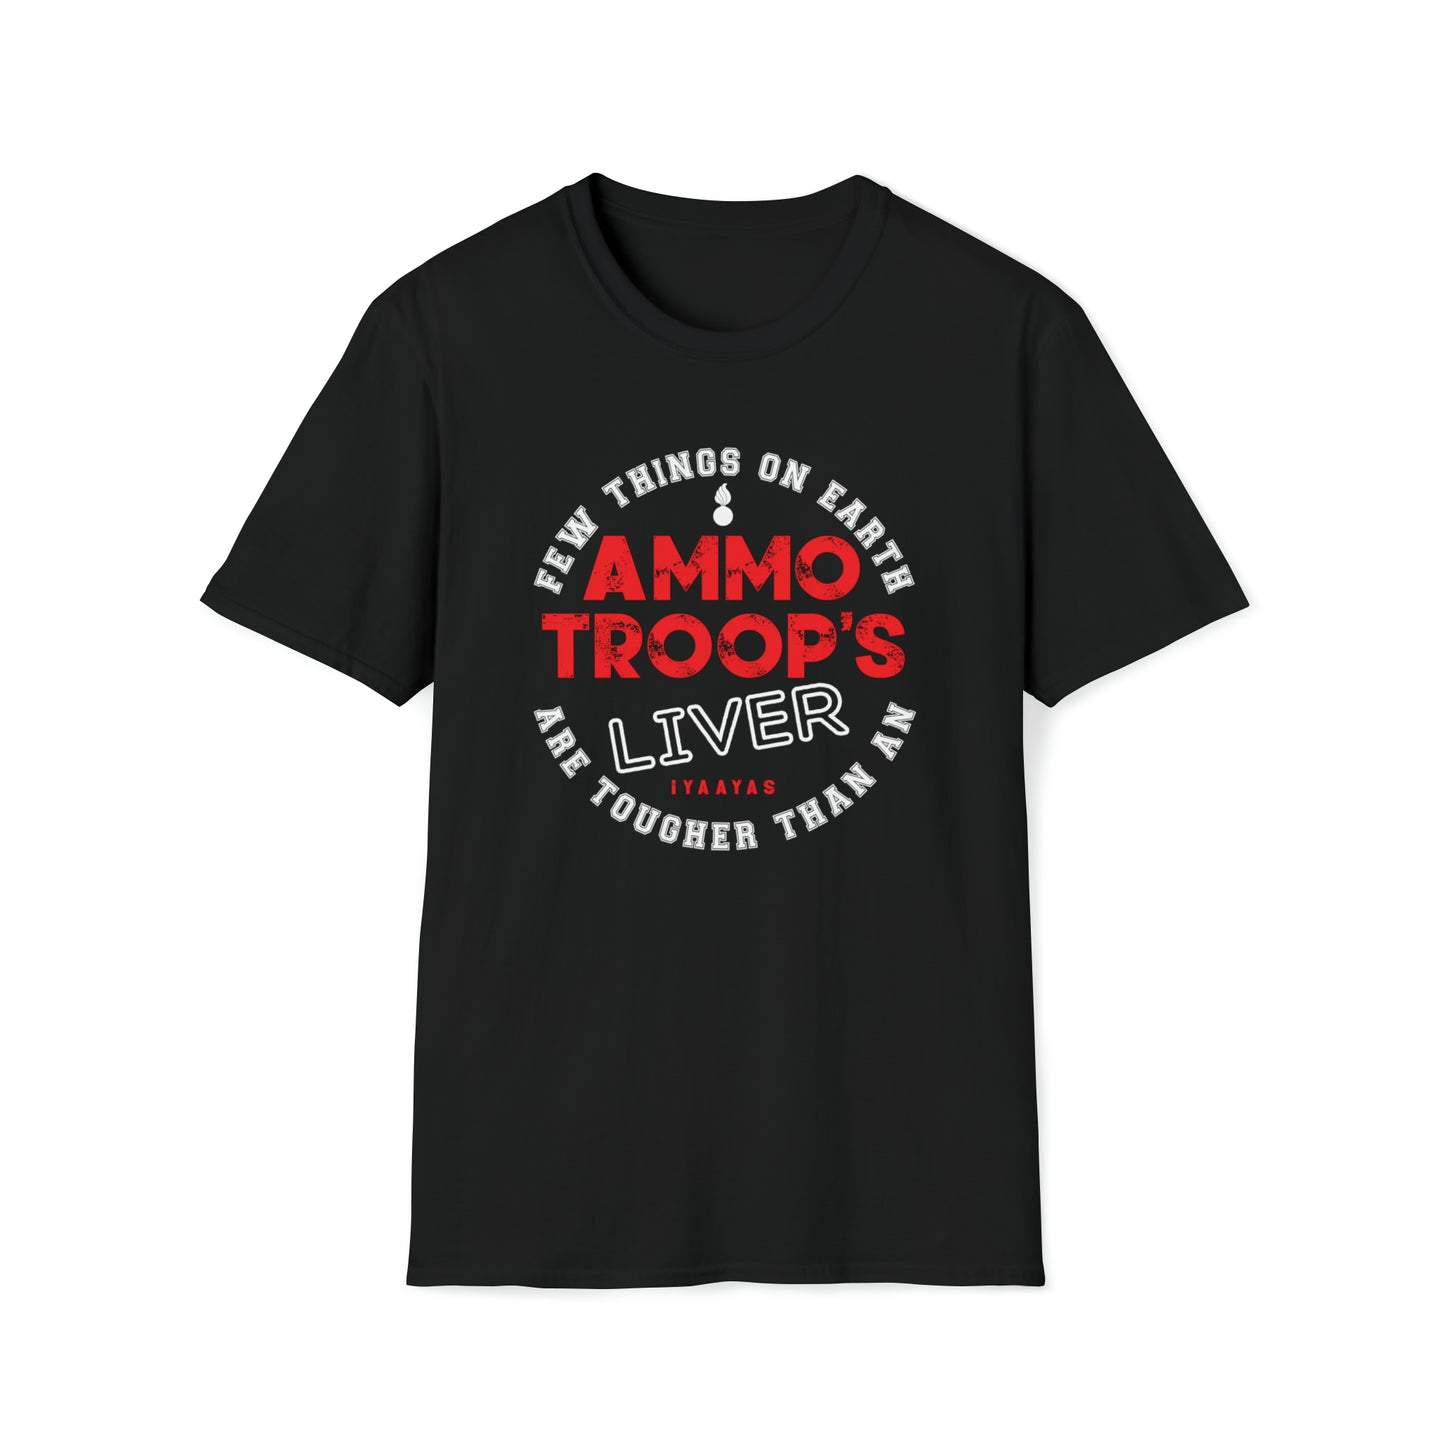 Few Things On Earth Are Tougher Than An AMMO Troops Liver Pisspot IYAAYAS Unisex Softstyle T-Shirt